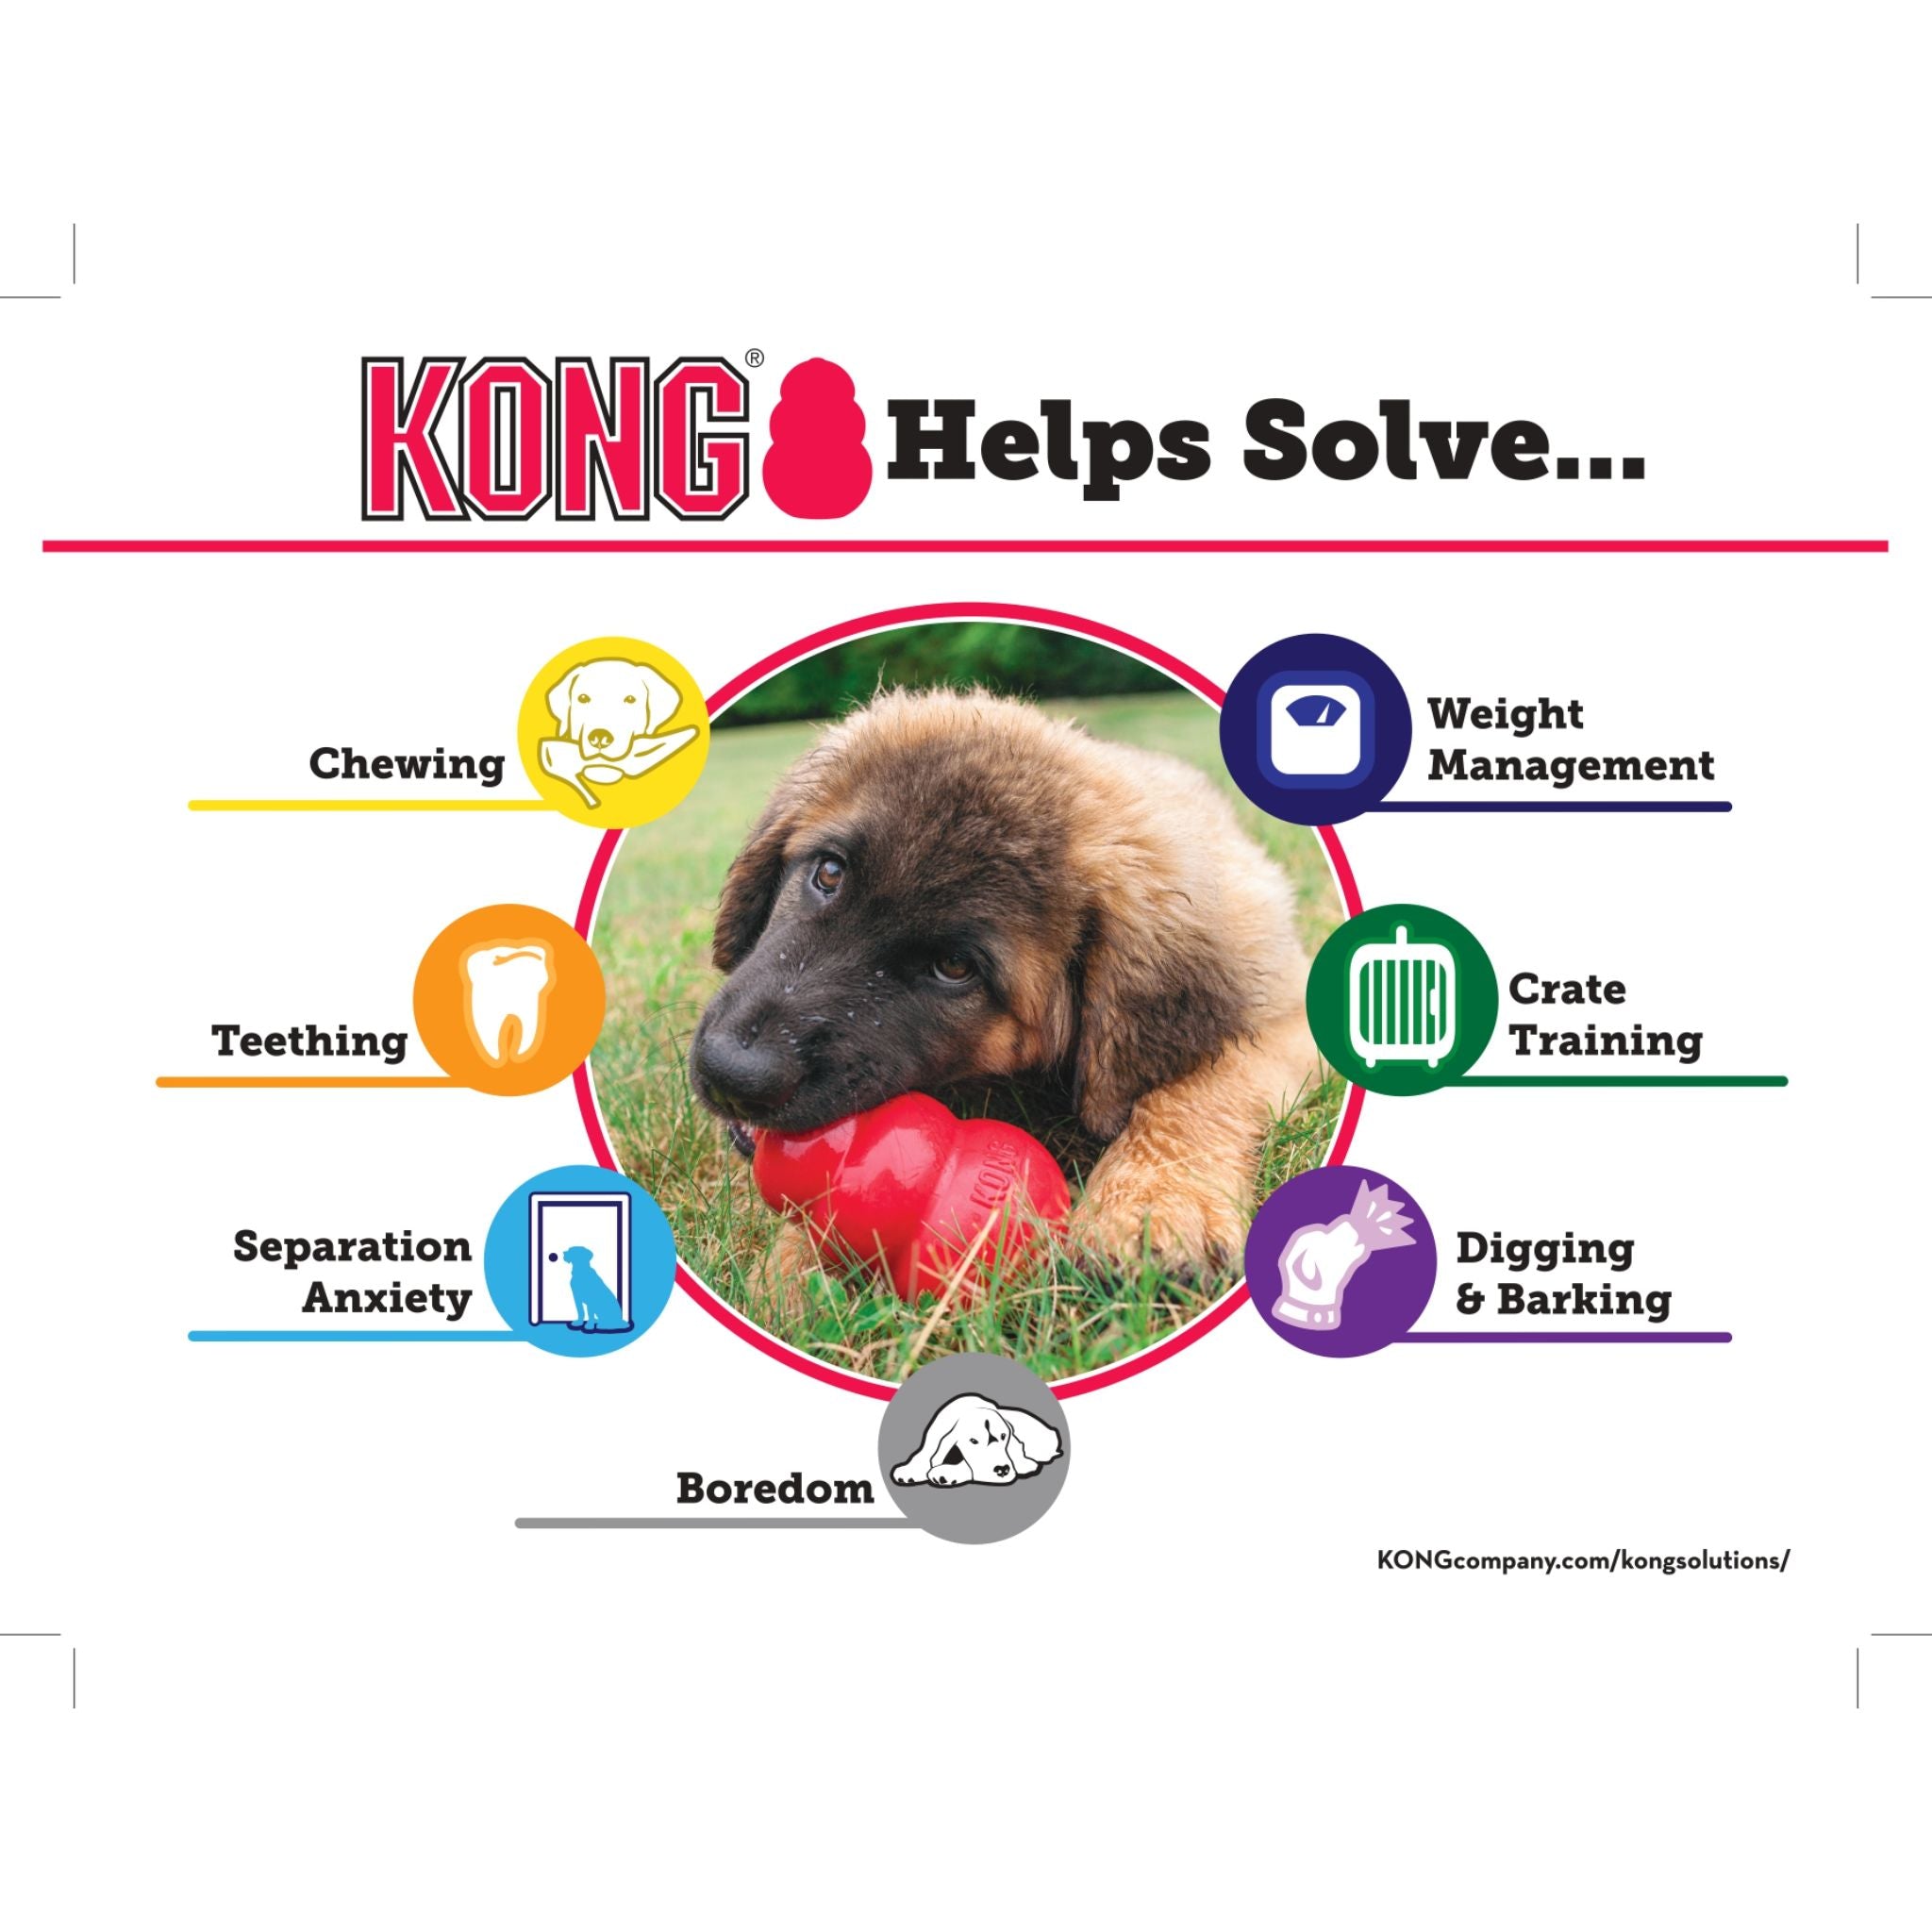 KONG Dog Toy - Tails (2 Sizes)